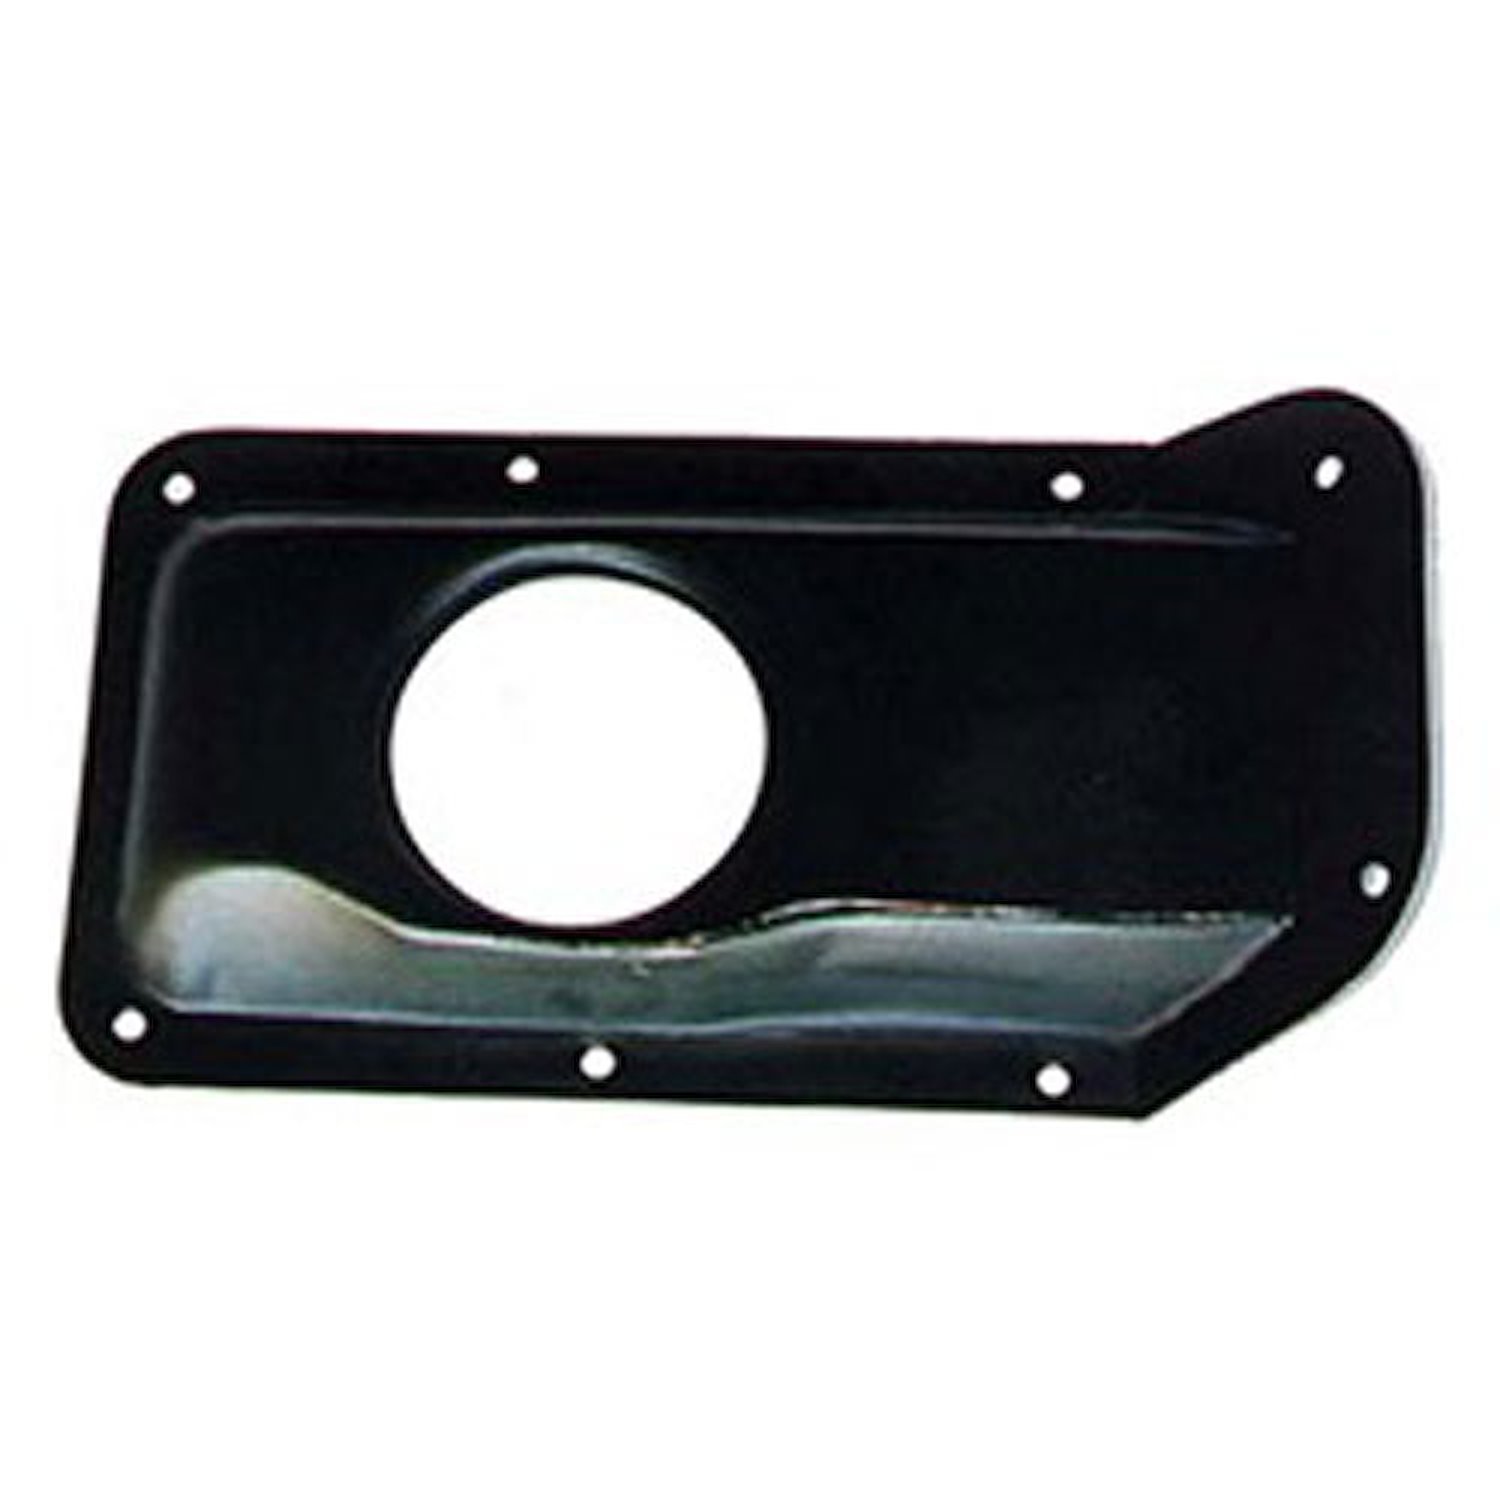 This center transmission floor access cover from Omix-ADA fits 52-71 Willys and Jeep models.